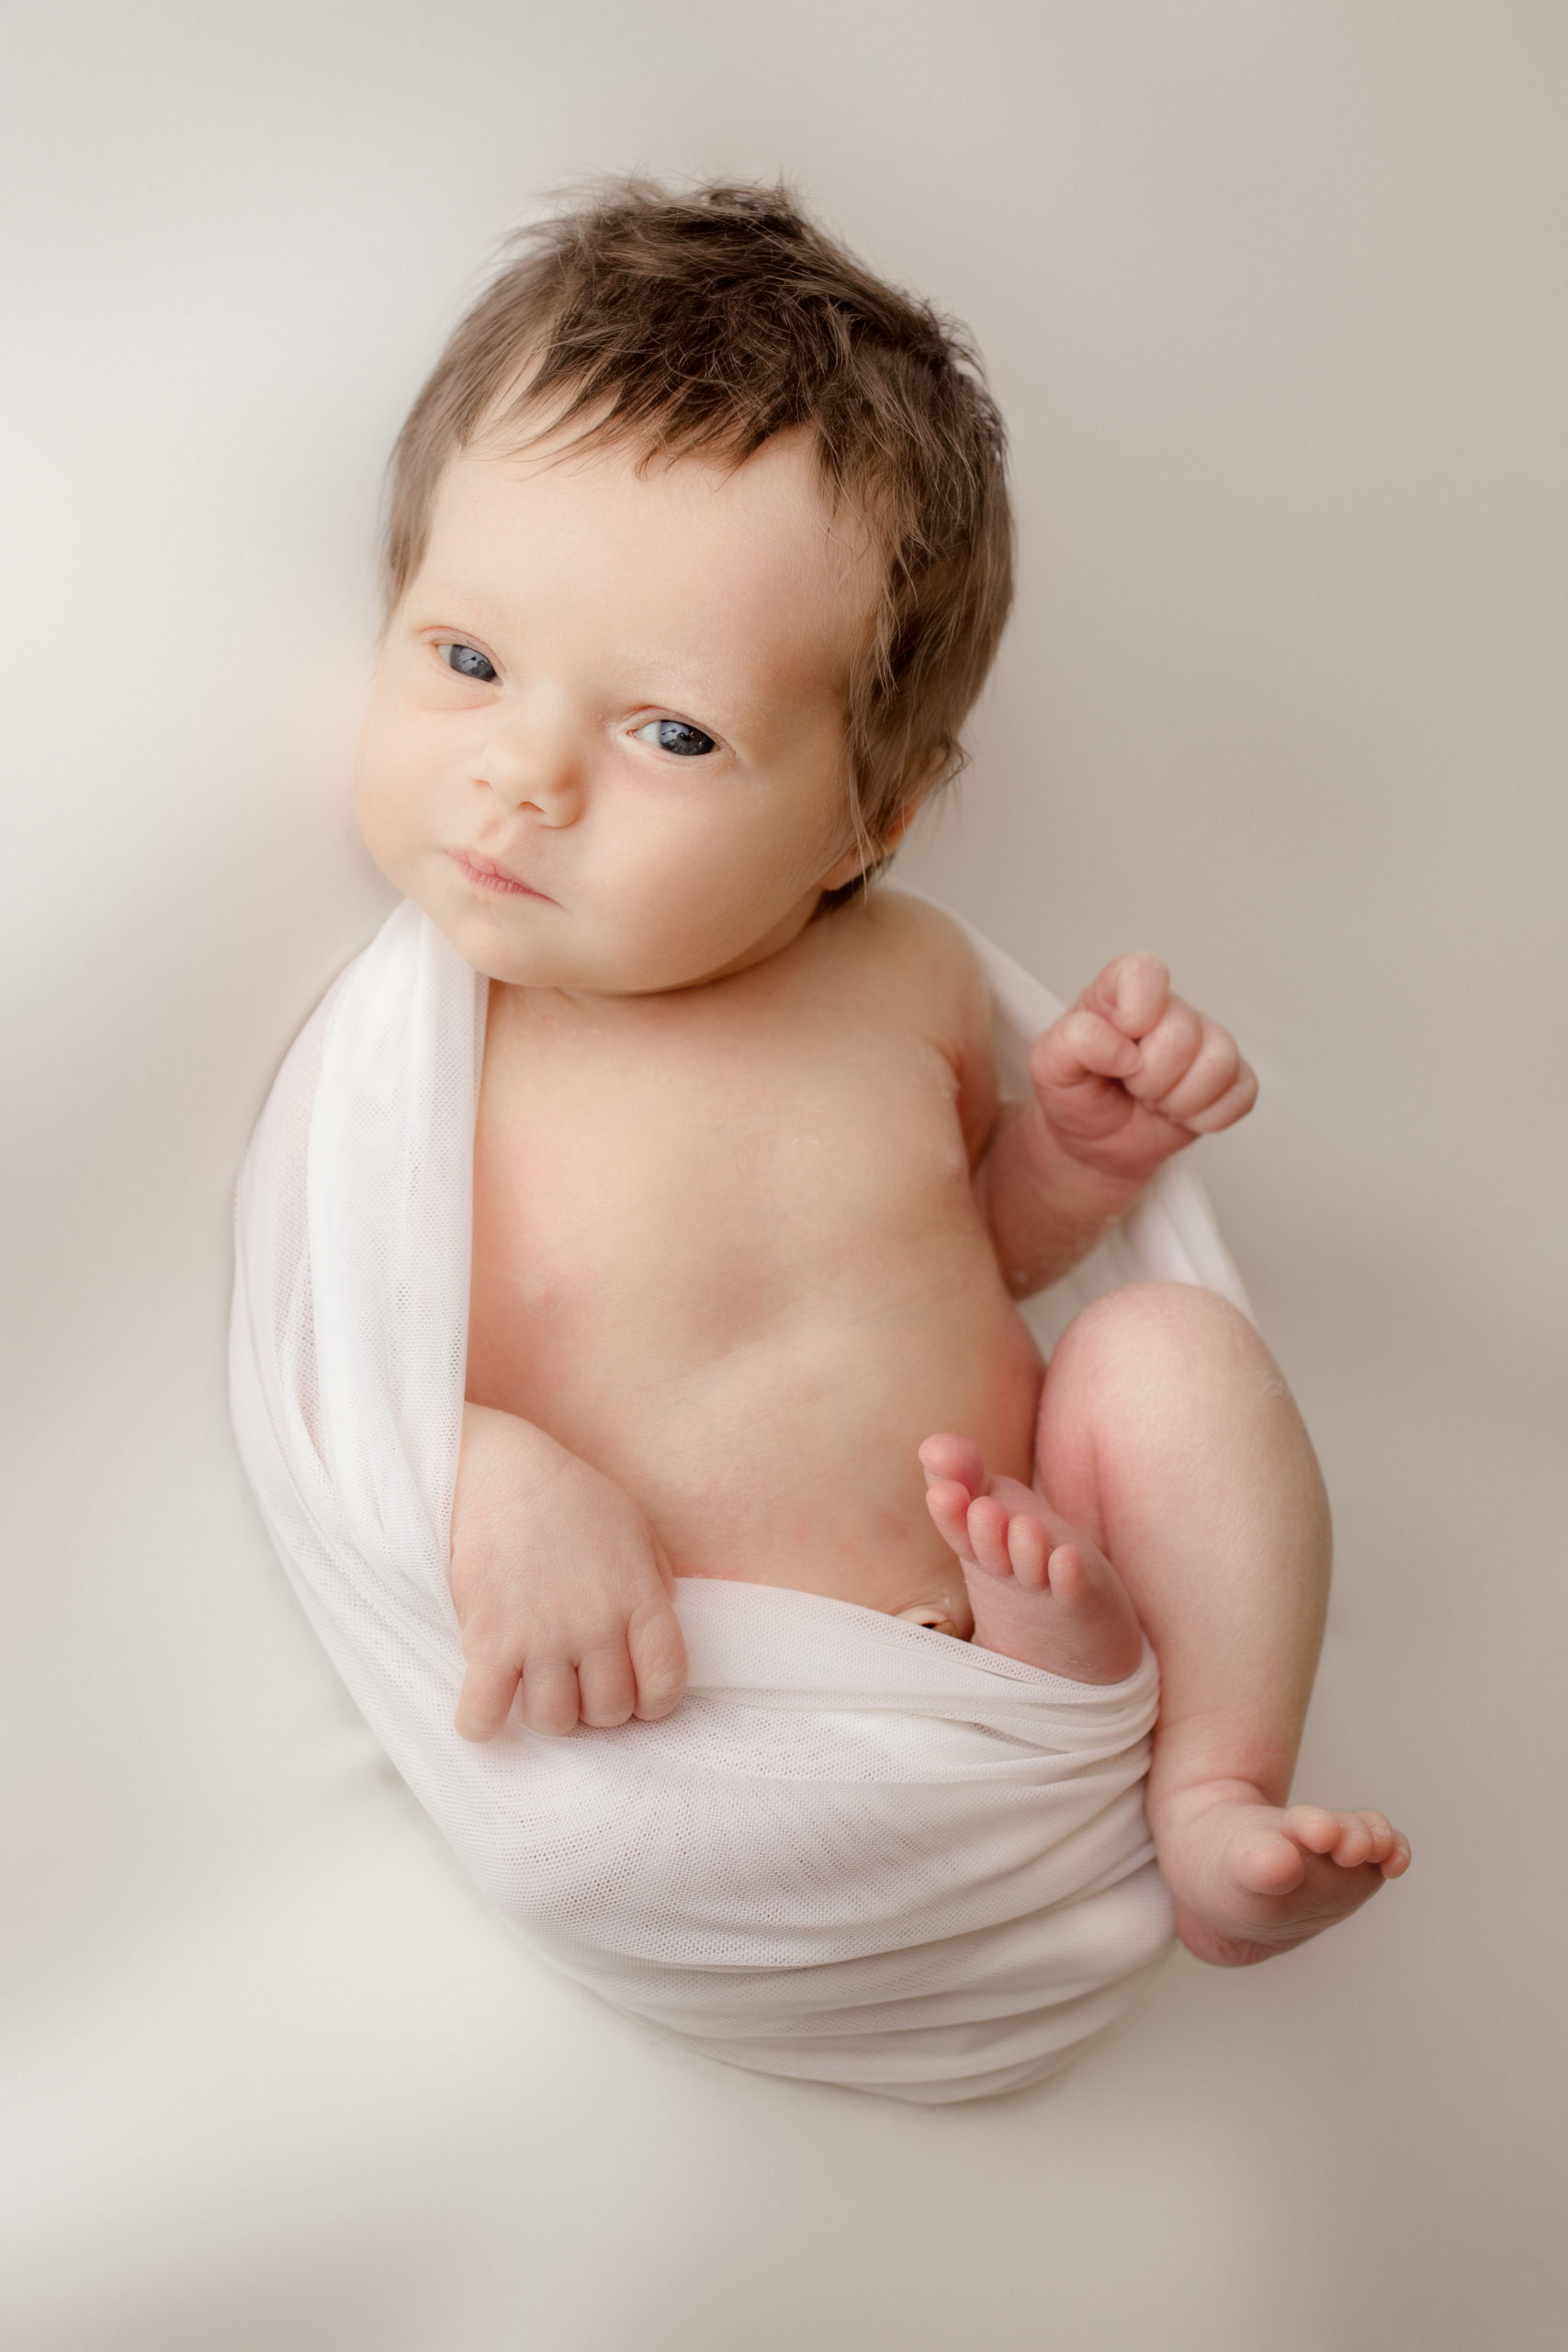 newborn baby girl wrapped in a white wrap during her photos at a Milwaukee photography studio